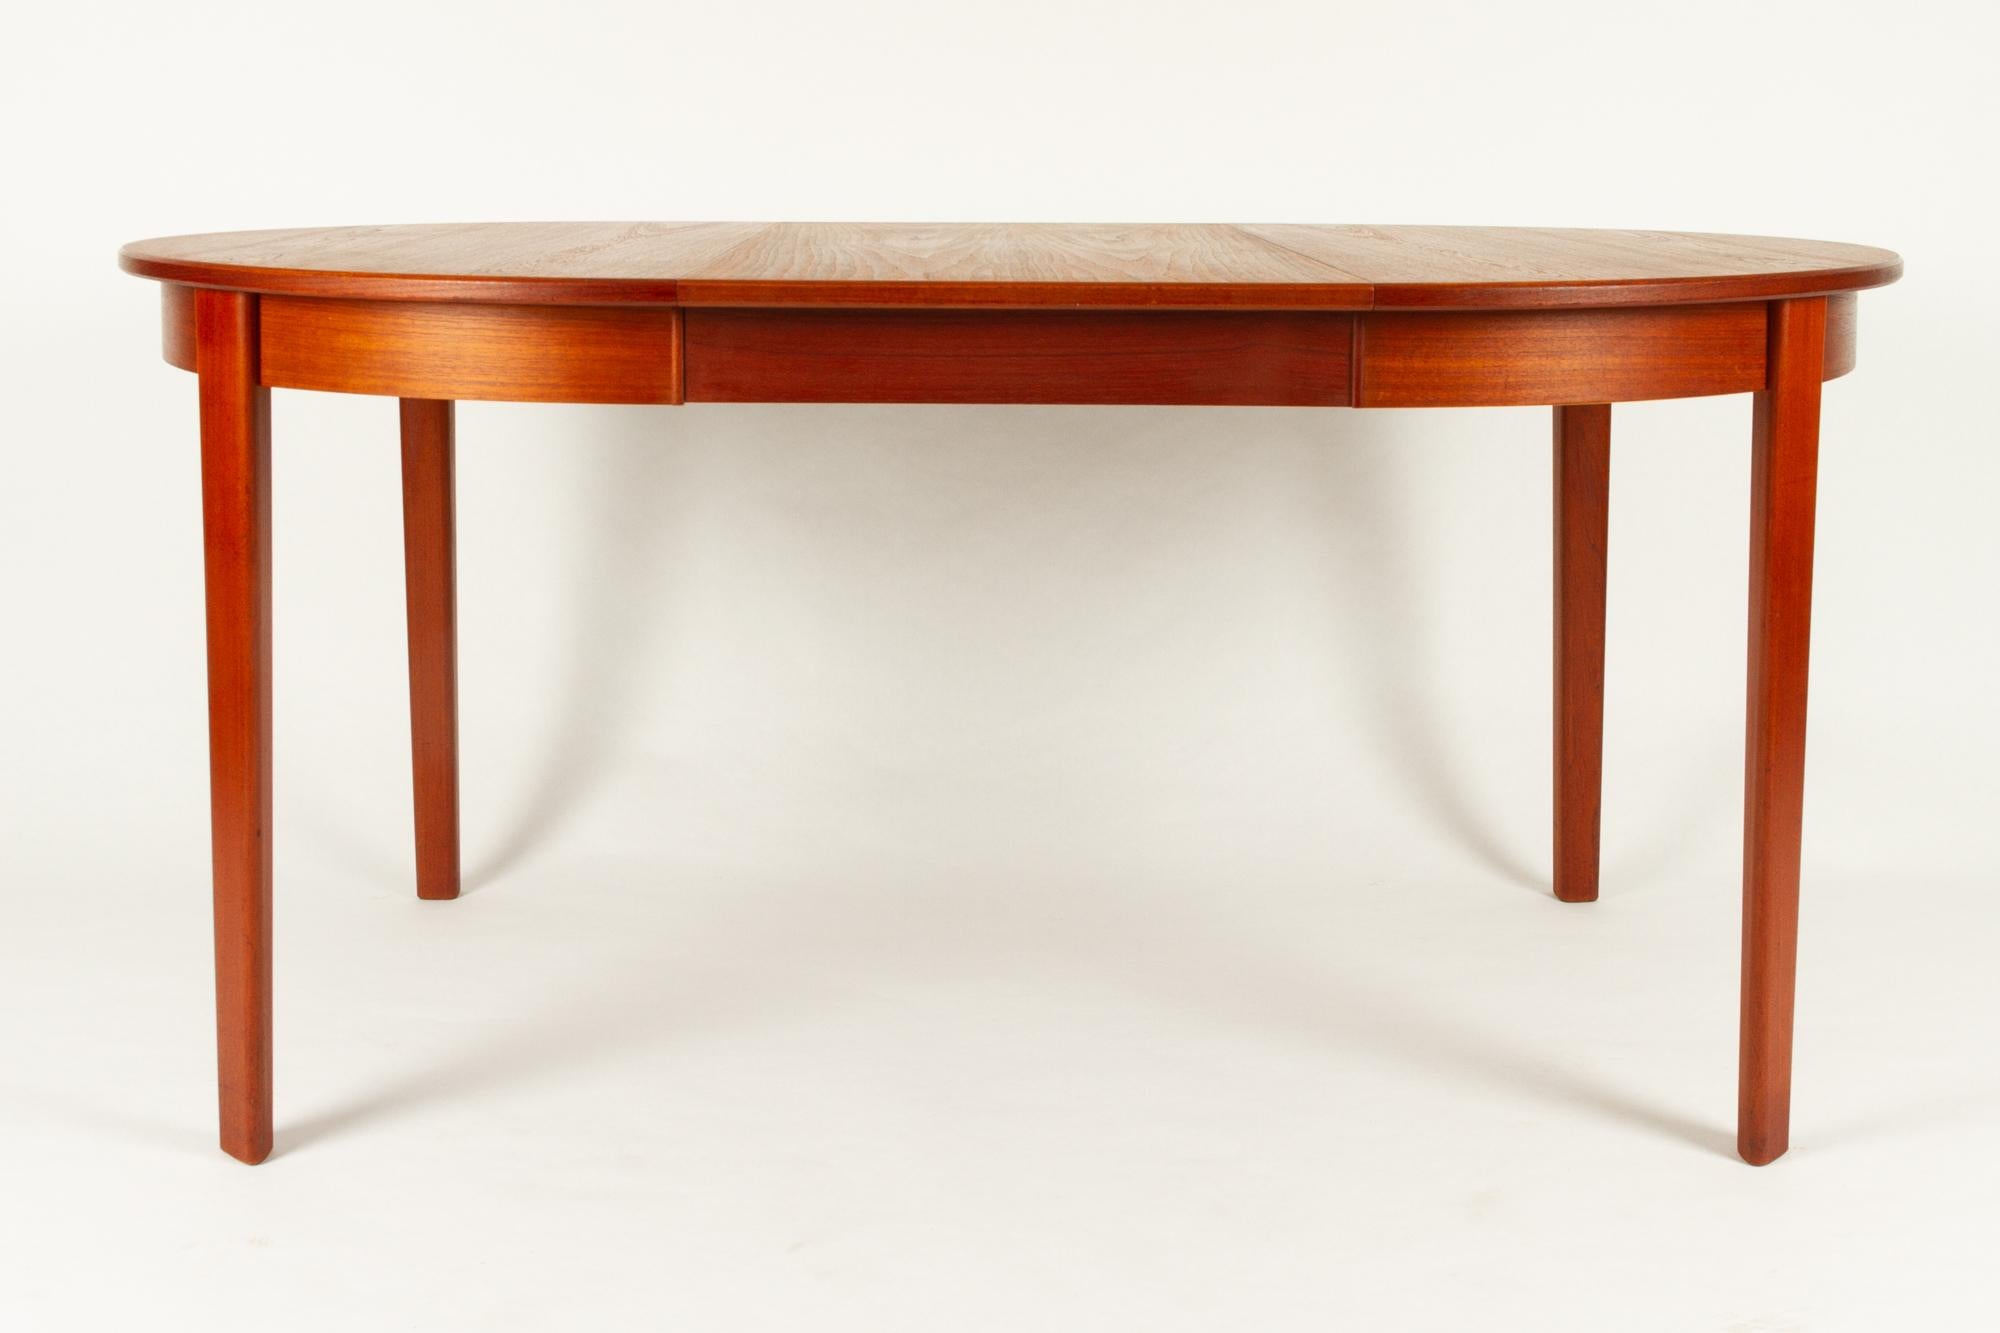 Round Danish extendable teak dining table, 1960s
Midcentury modern teak dining table with two extension leaves. Many lovely details, very good craftsmanship.
Measures: Diameter 110 cm. Length with one leaf 160 cm. With both leaves 210cm.
Very